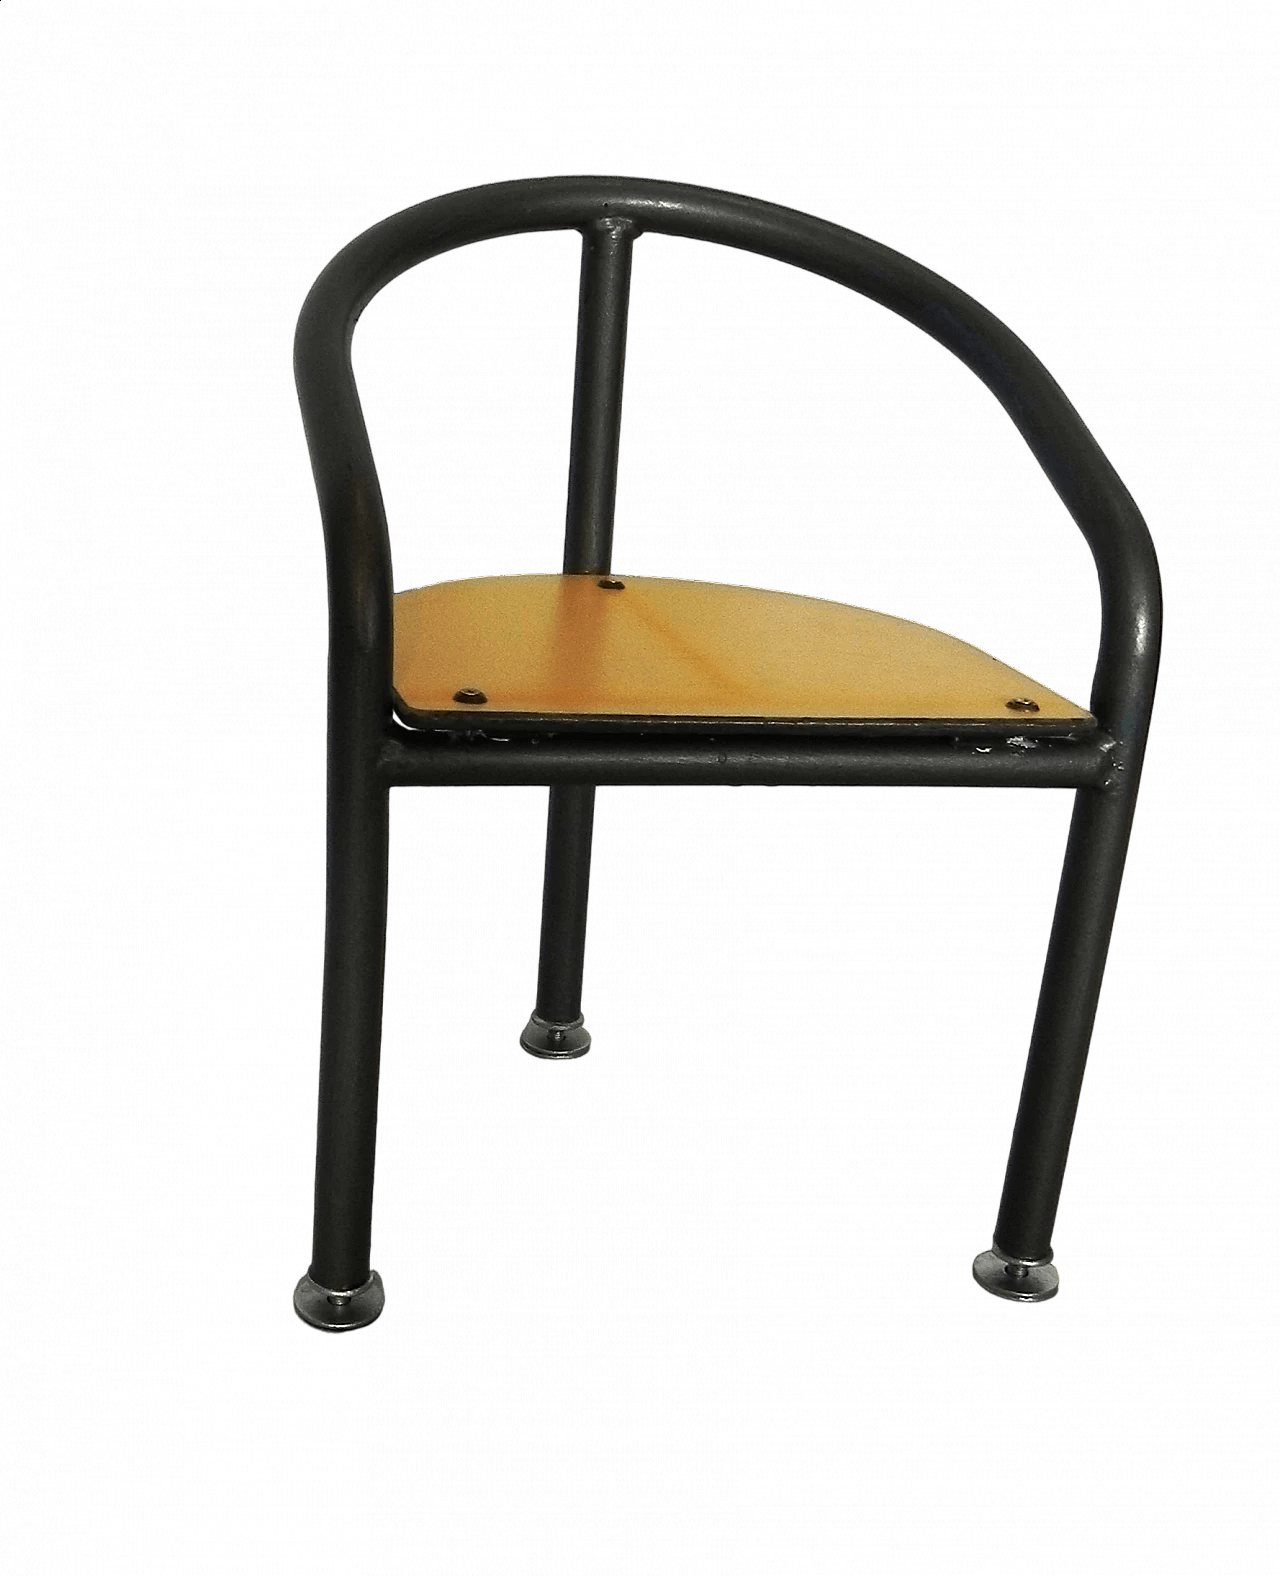 Children's chair from a merry-go-round, 1980s 17